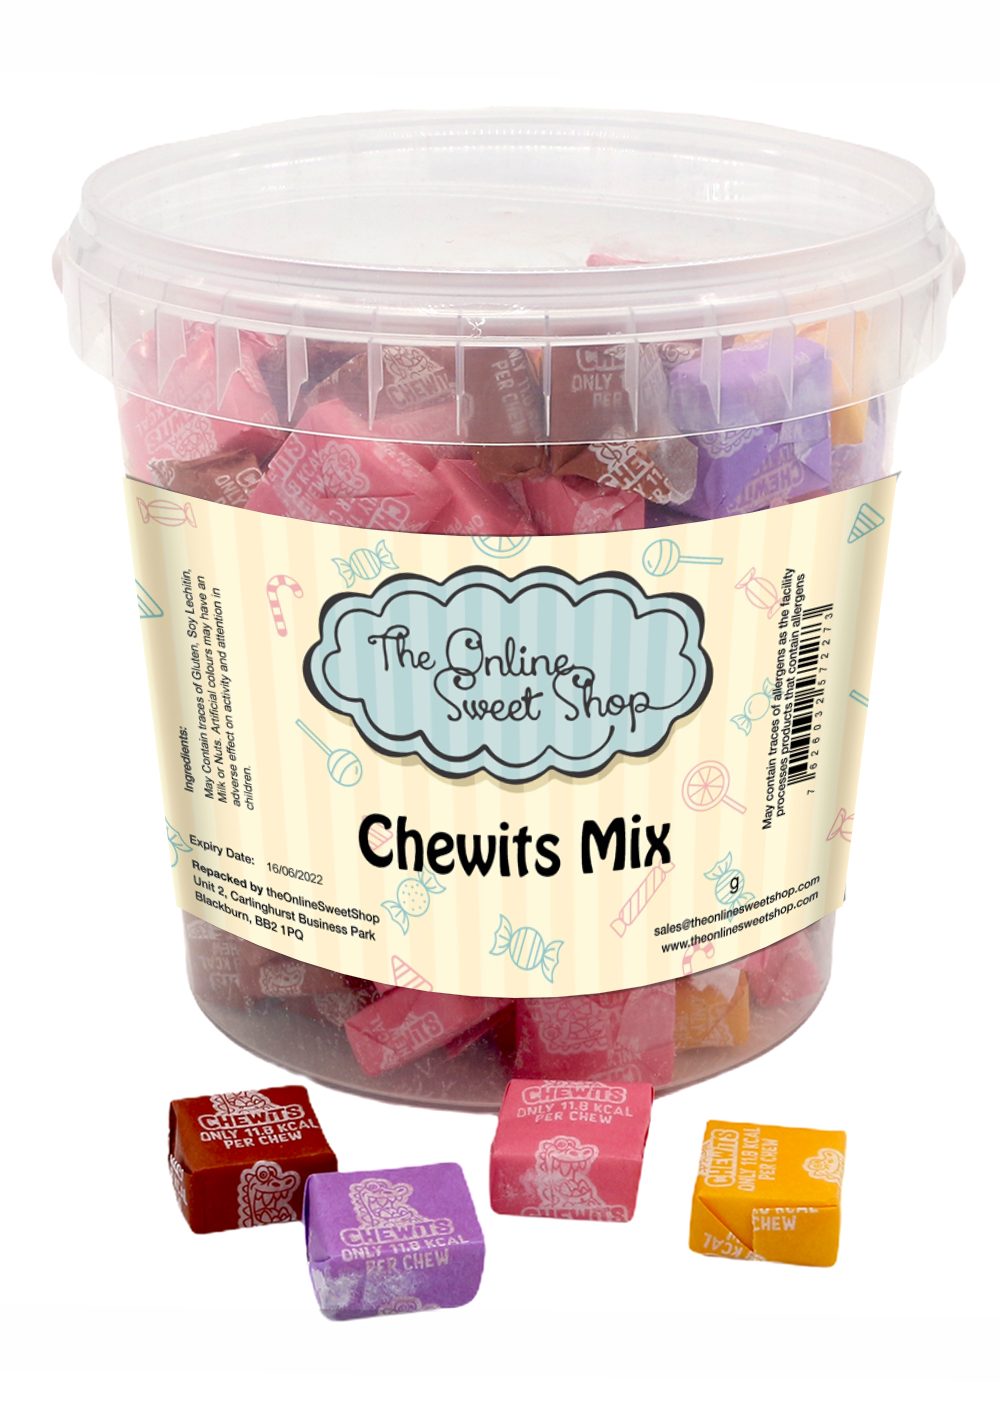 Chewits Mix Sweets Bucket